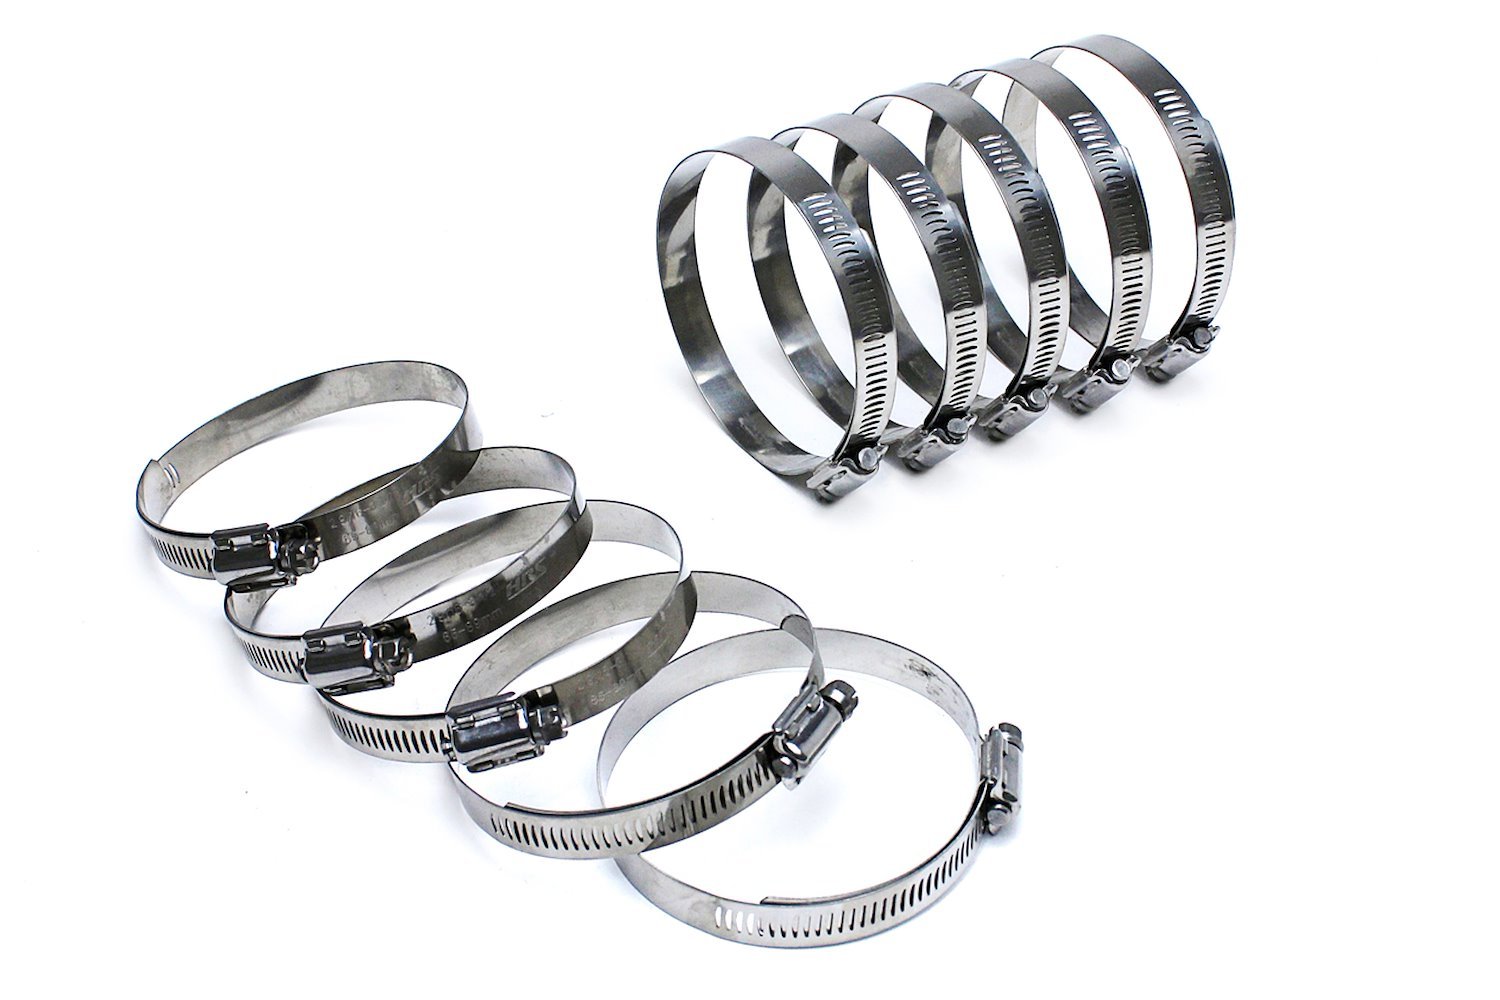 SSWC-59-83x10 Stainless Steel Worm Gear Hose Clamp, Effective Range: 2-5/16 in.- 3-1/4 in., 10Pc